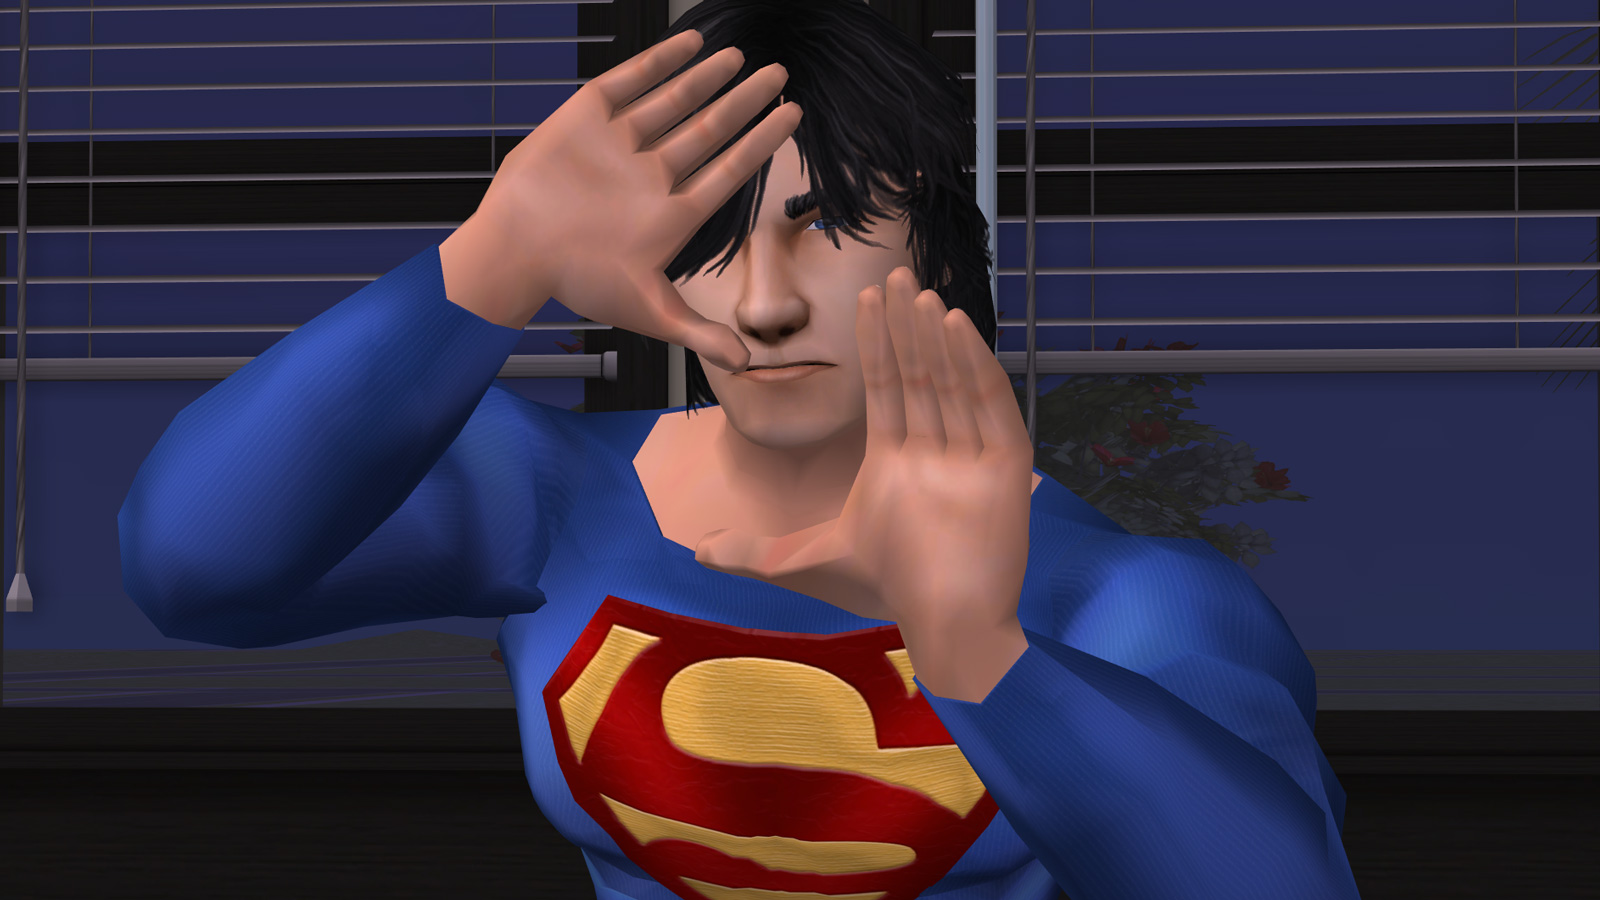 Superboy. Uniform update coming in the future. Don't forget to chew up that pretty face of his too, lol!